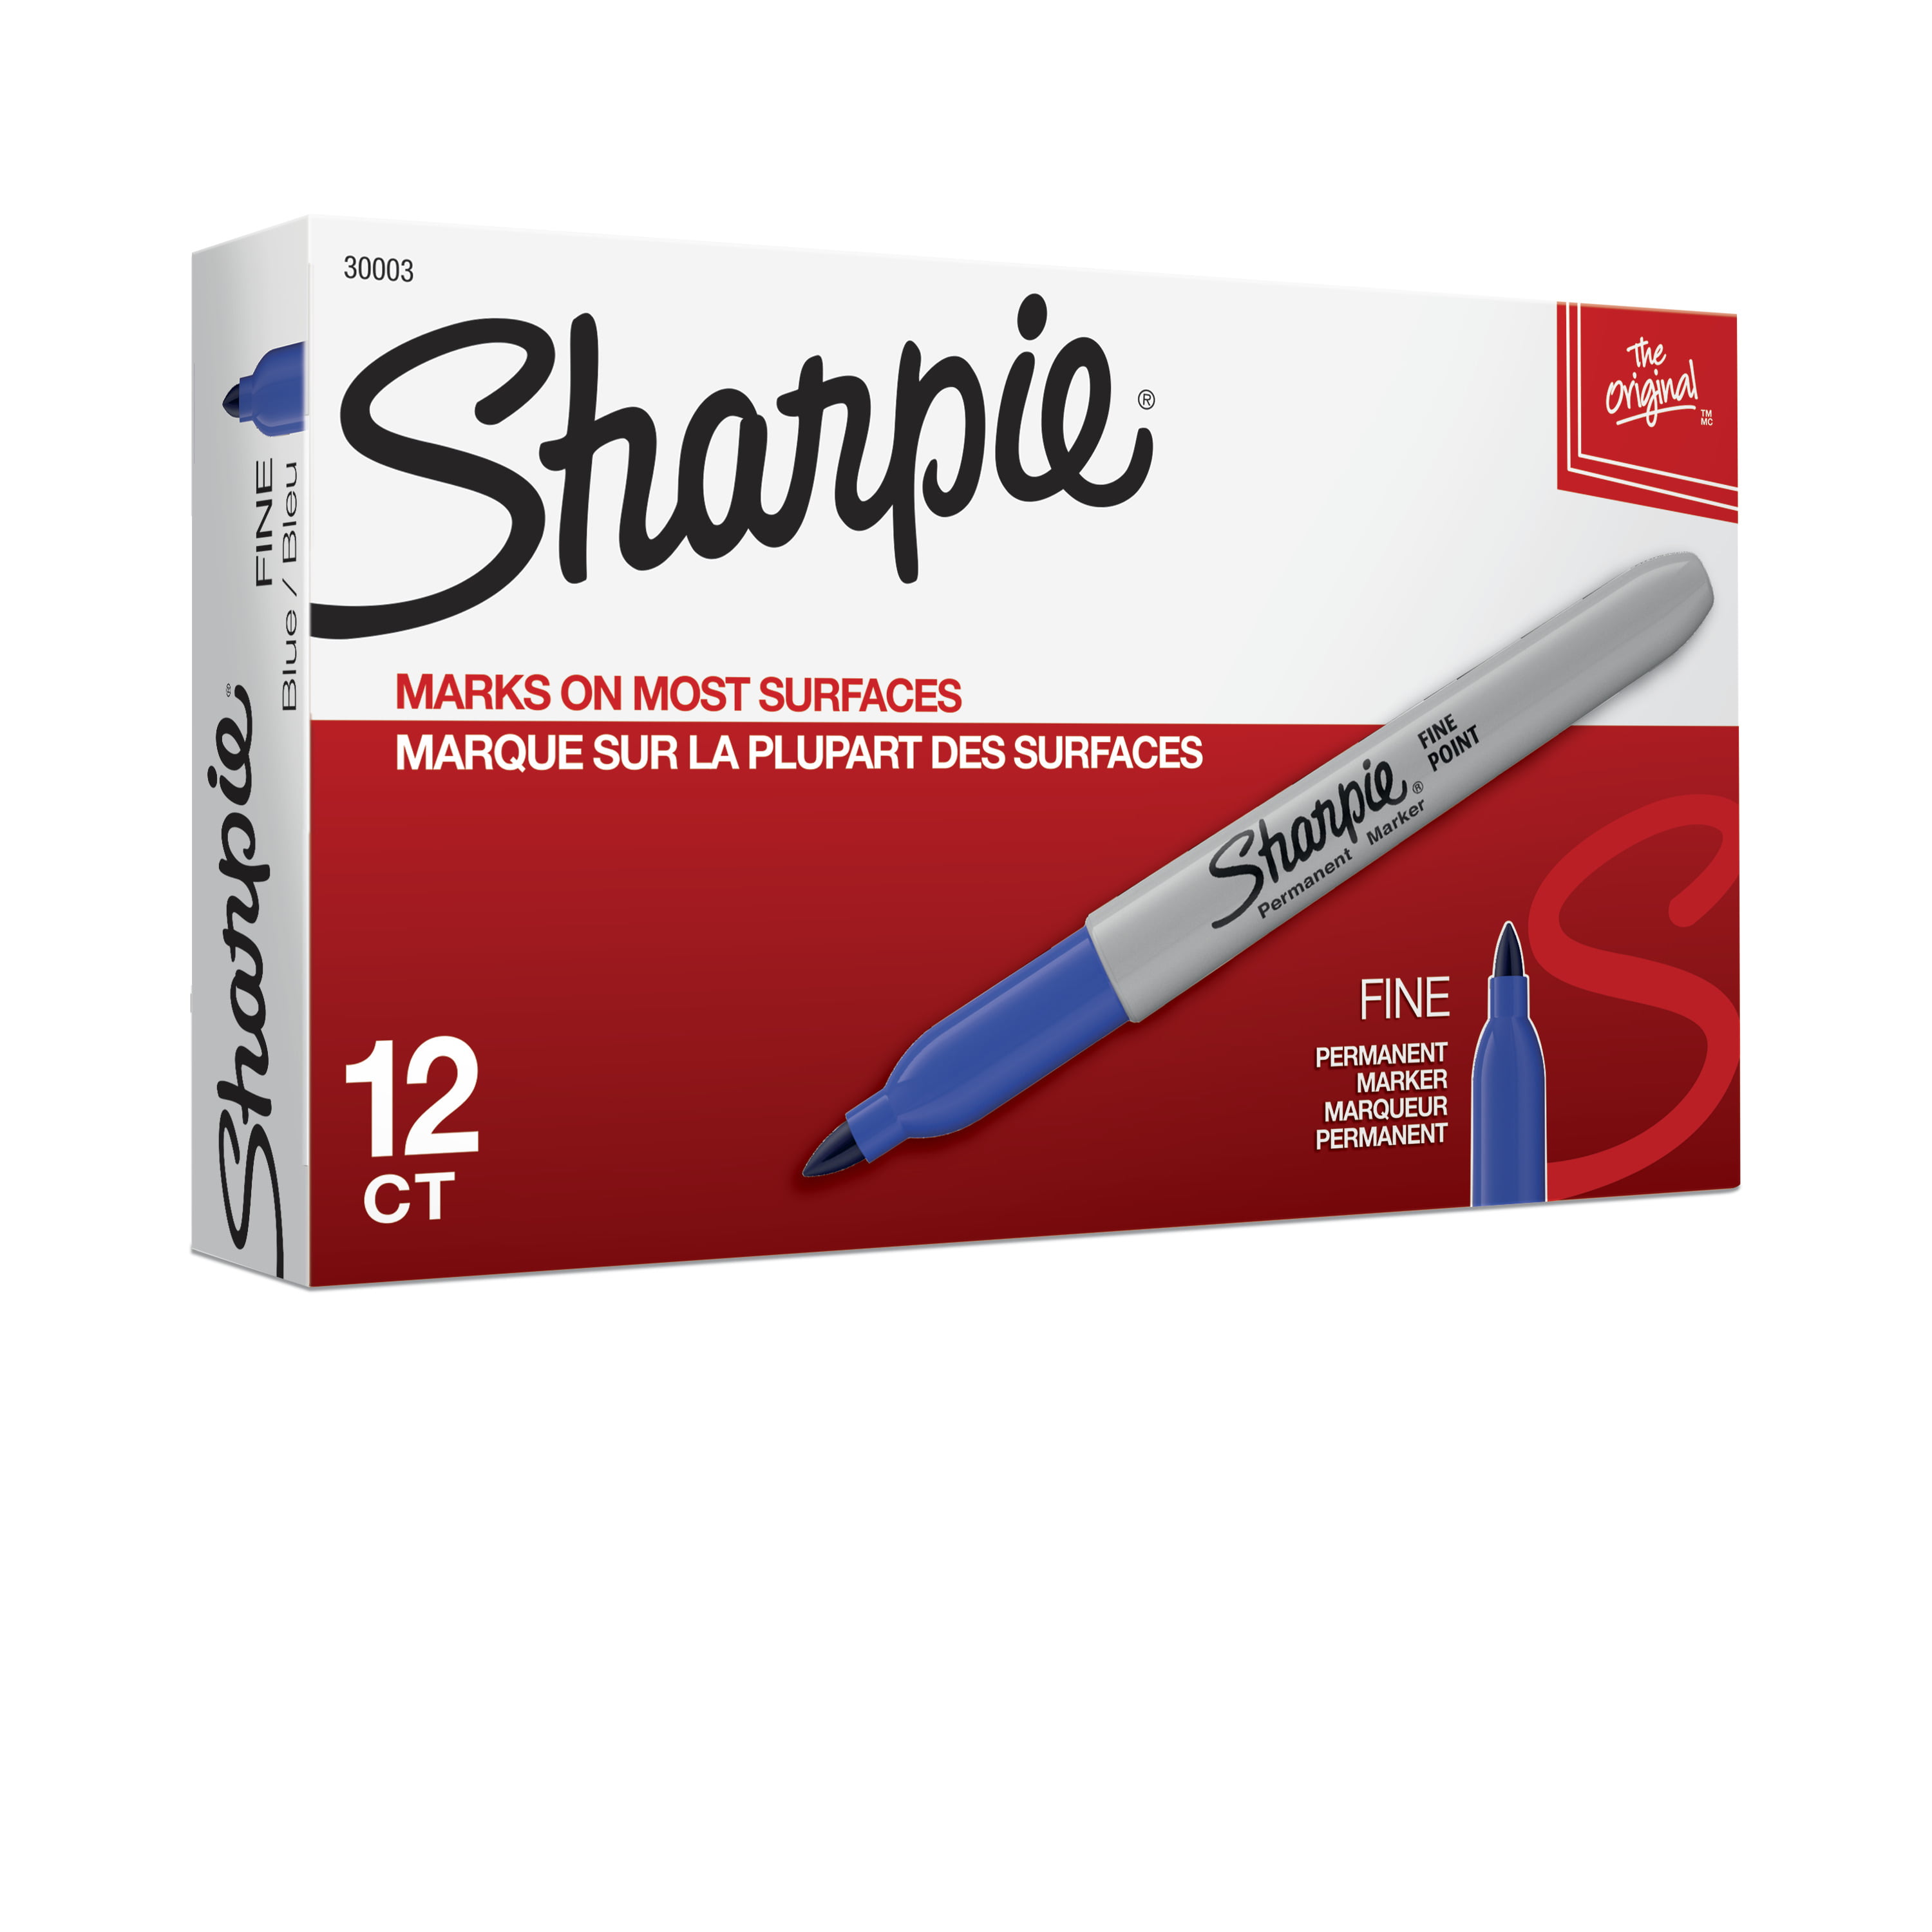 Sharpie 15003 King Size Permanent Marker Blue 12-Pack New